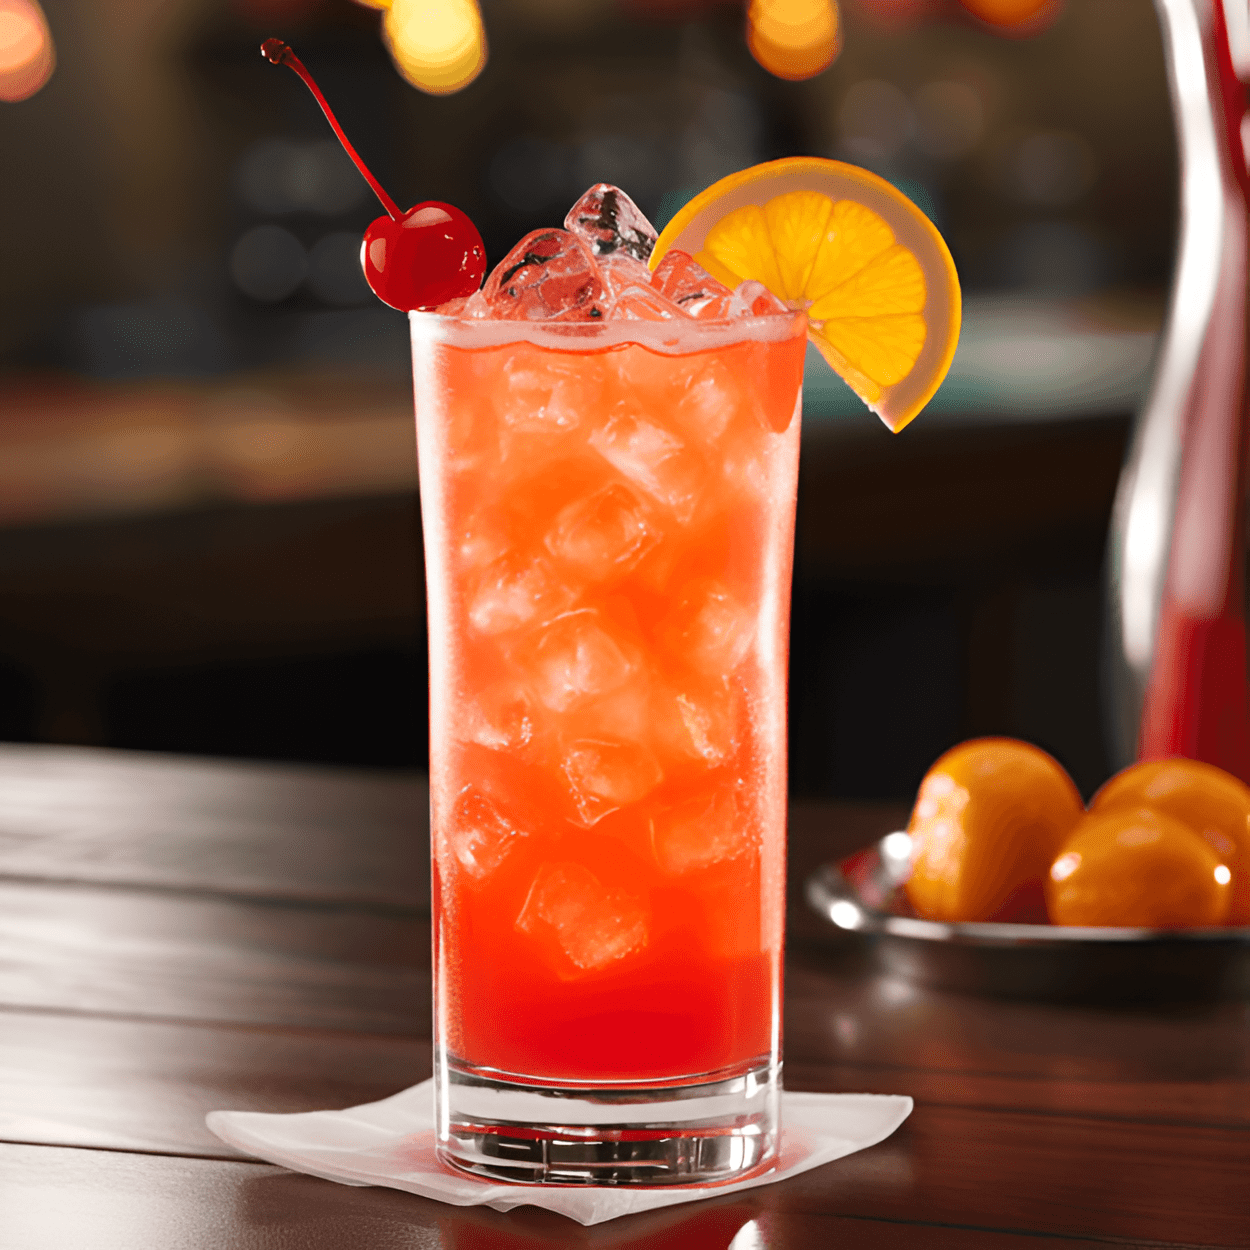 Malibu Hurricane Cocktail Recipe - The Malibu Hurricane is a sweet, fruity cocktail with a tropical twist. The coconut flavor of the Malibu rum combines perfectly with the tangy citrus juices, creating a refreshing and vibrant taste. The grenadine adds a hint of tartness, balancing out the sweetness of the other ingredients.